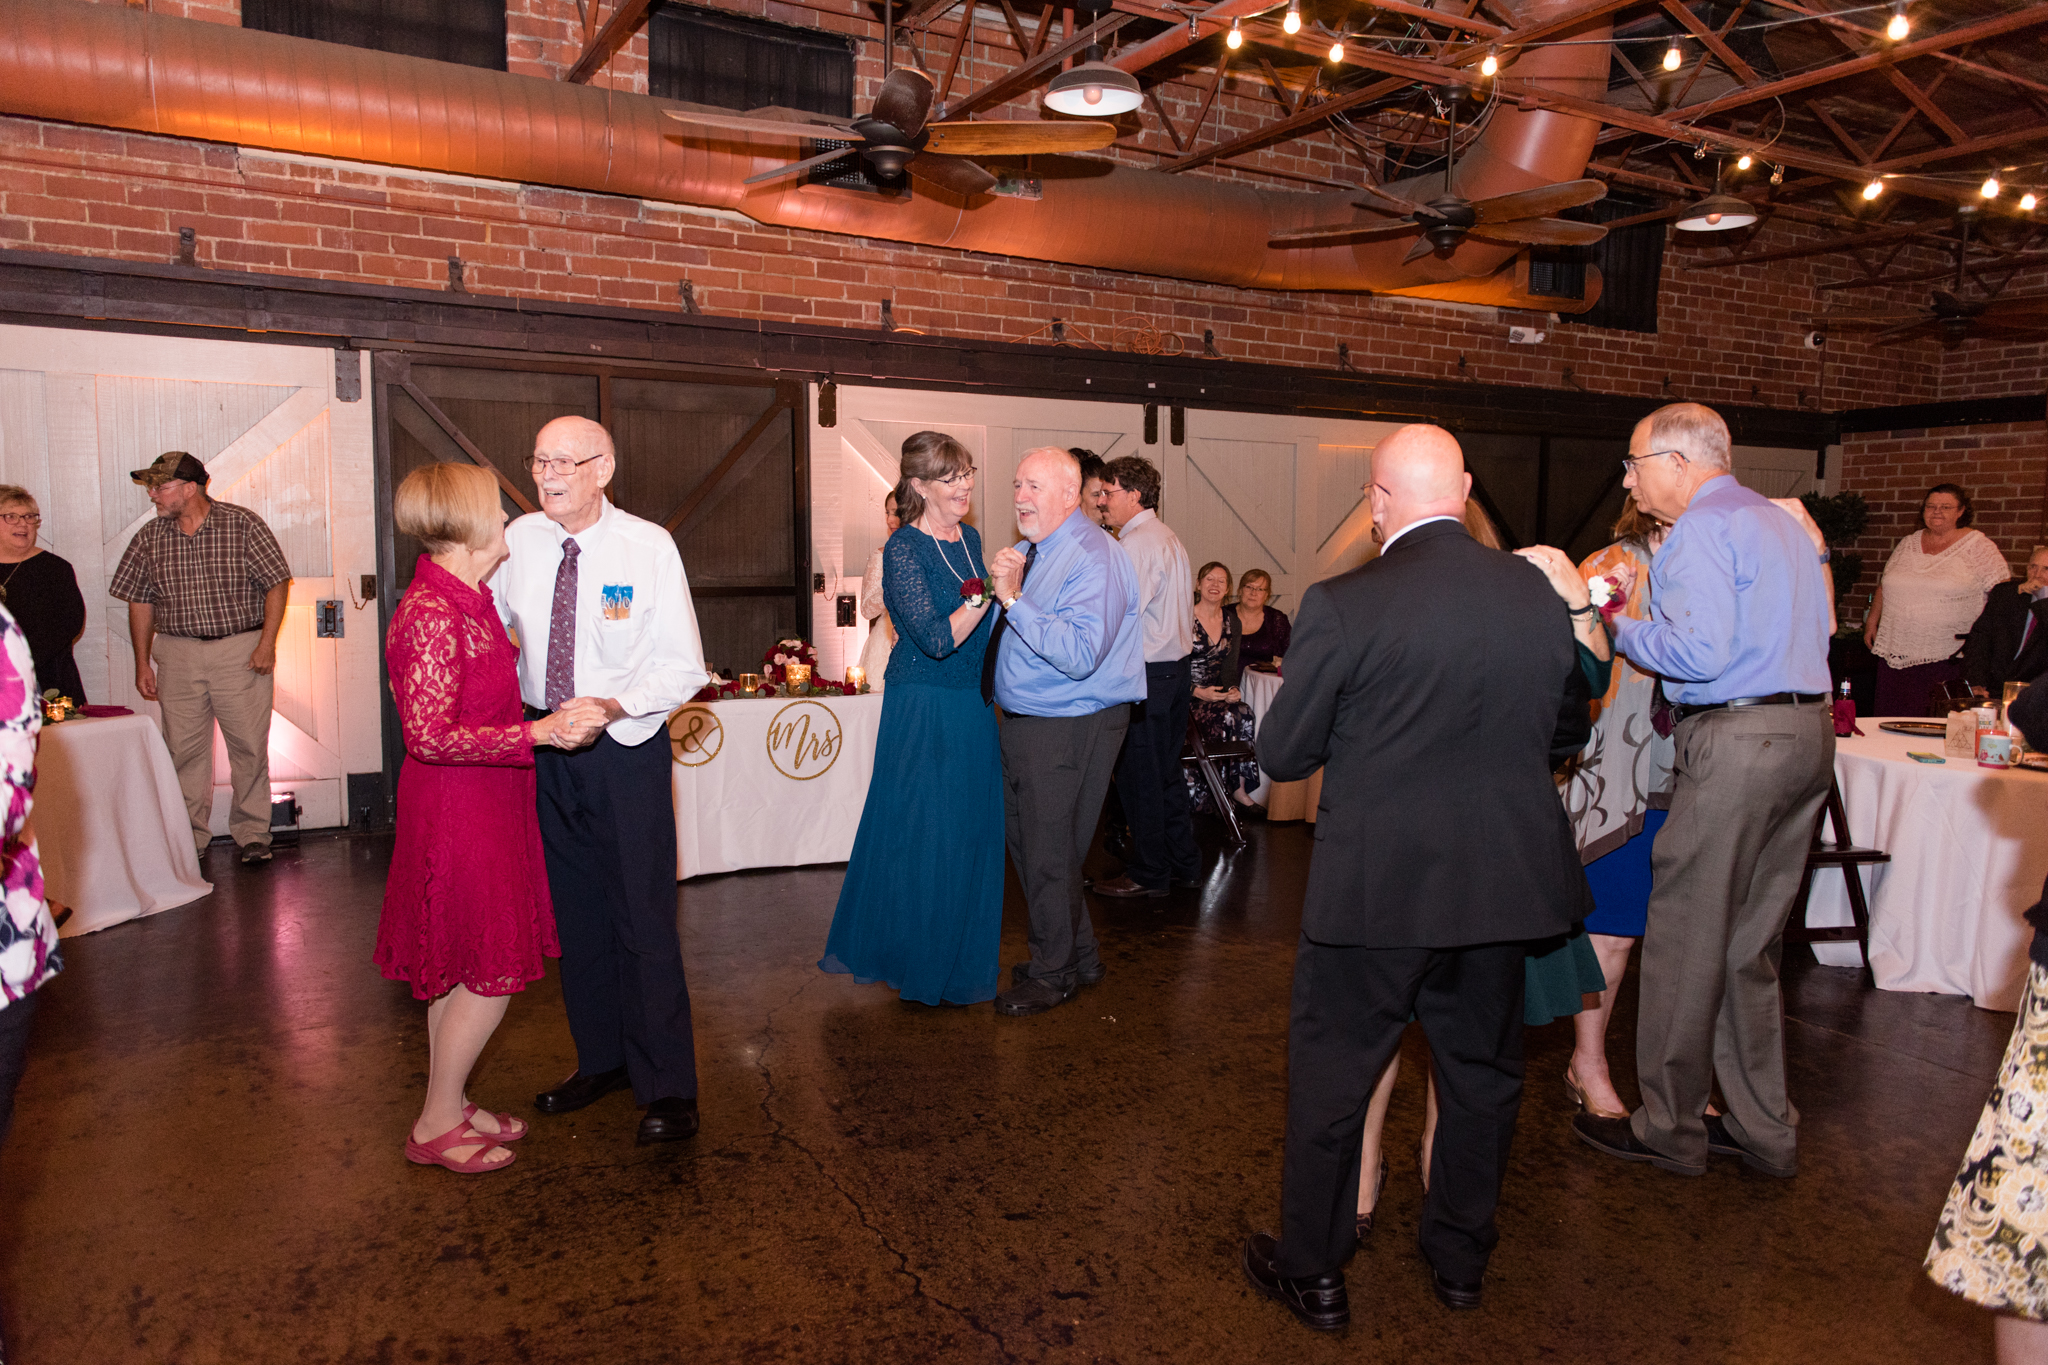 Couples dance at wedding reception.